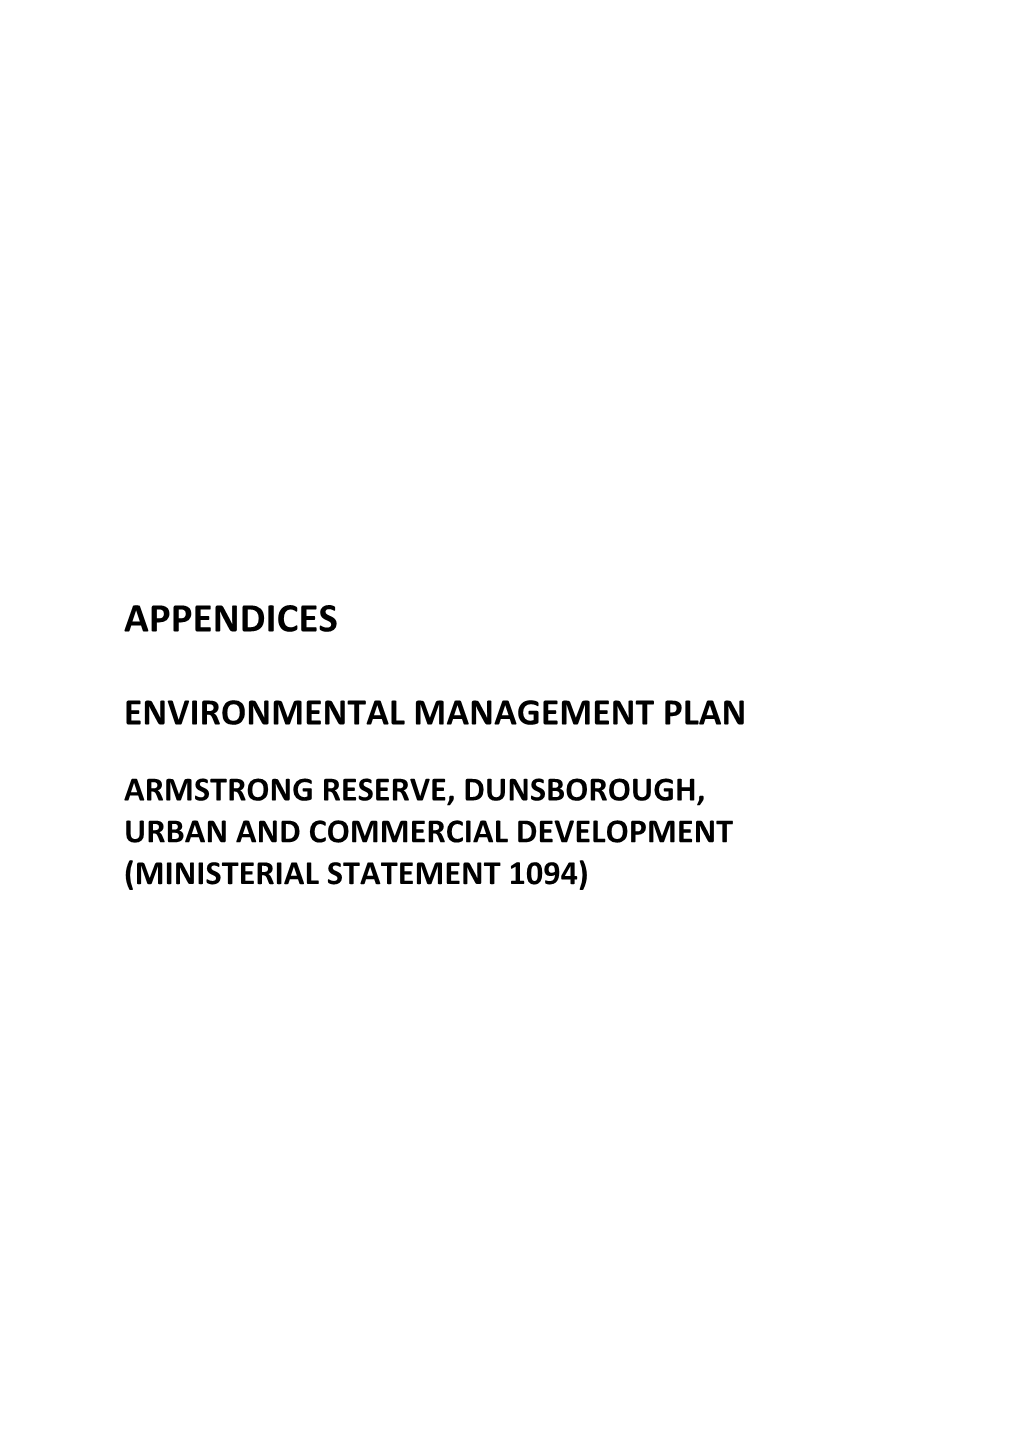 Environmental Management Plan Appendices 1 to 4